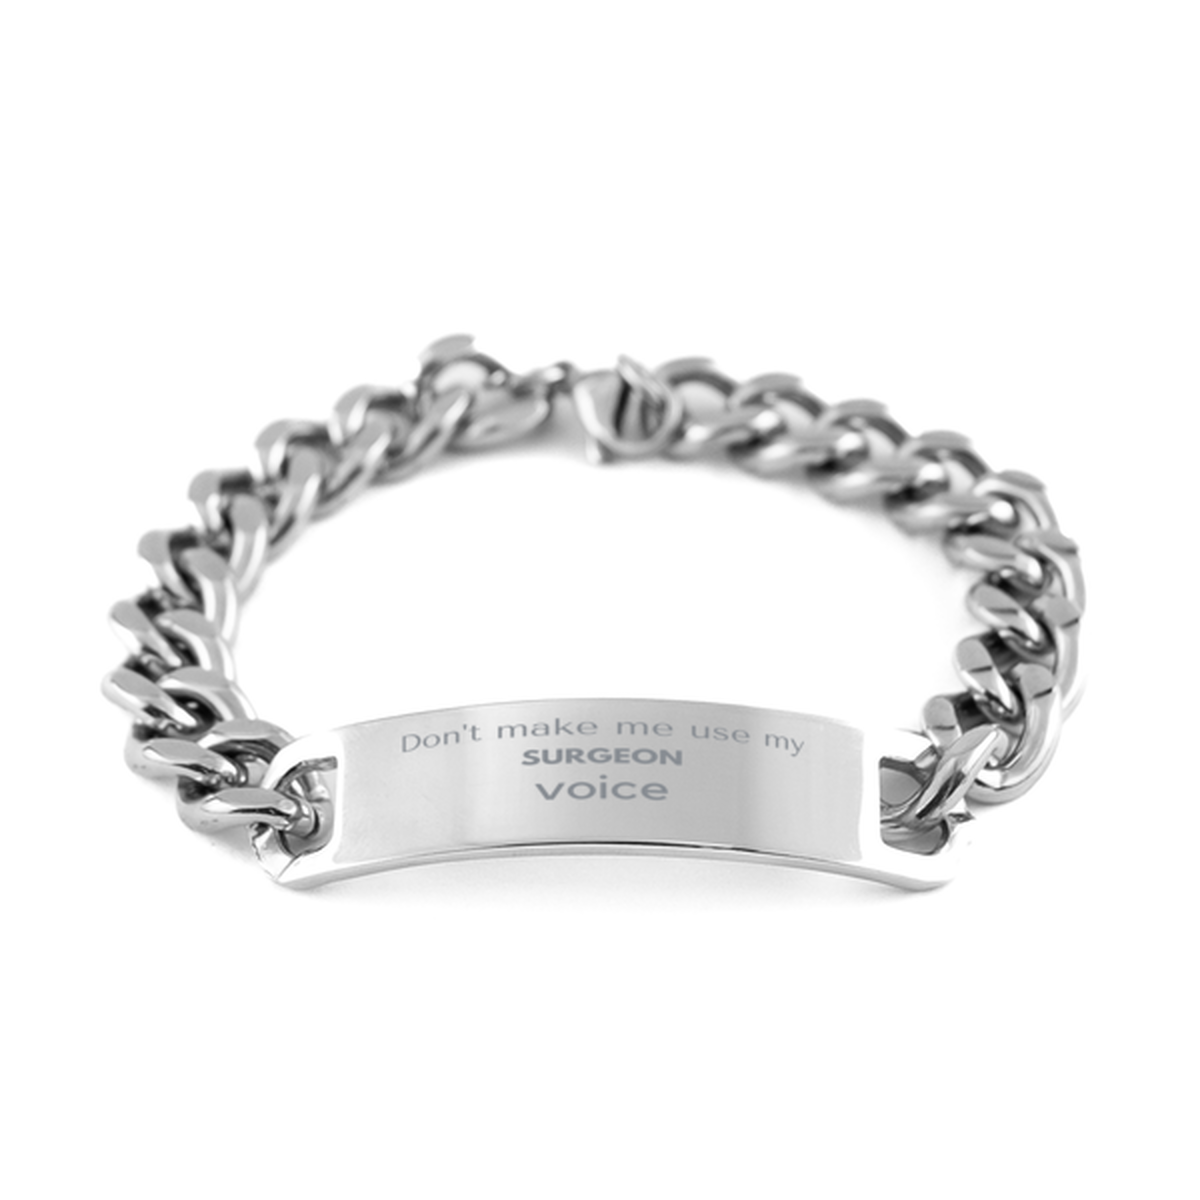 Don't make me use my Surgeon voice, Sarcasm Surgeon Gifts, Christmas Surgeon Cuban Chain Stainless Steel Bracelet Birthday Unique Gifts For Surgeon Coworkers, Men, Women, Colleague, Friends